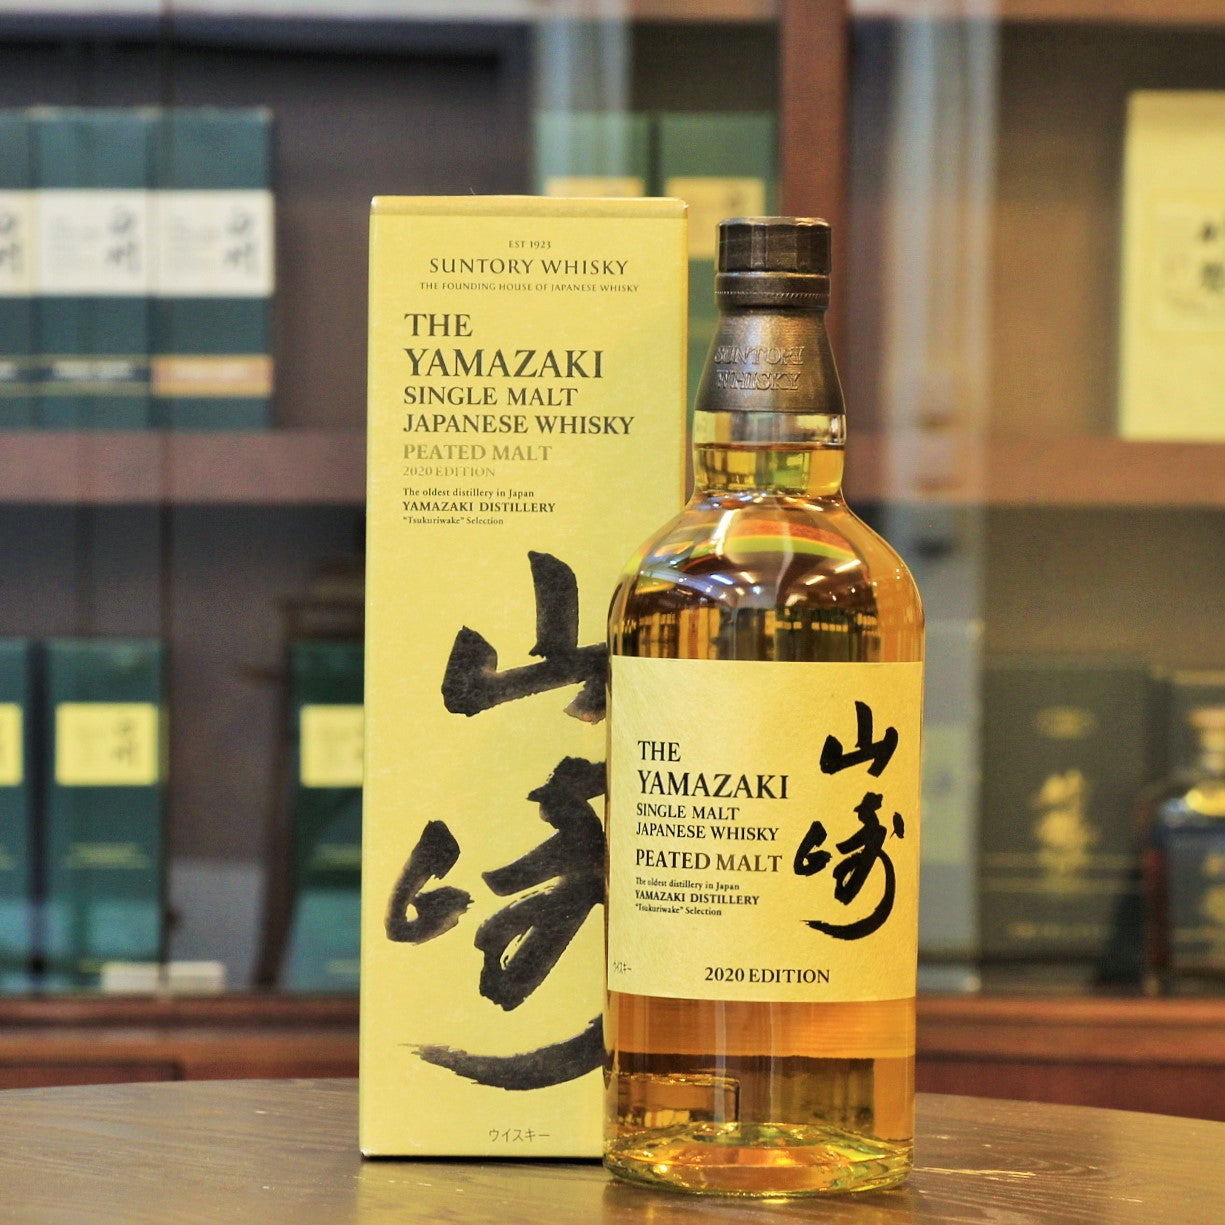 A limited edition release from Suntory in November 2020. Peated Whisky from Yamazaki. Single Malt Japanese Whisky.